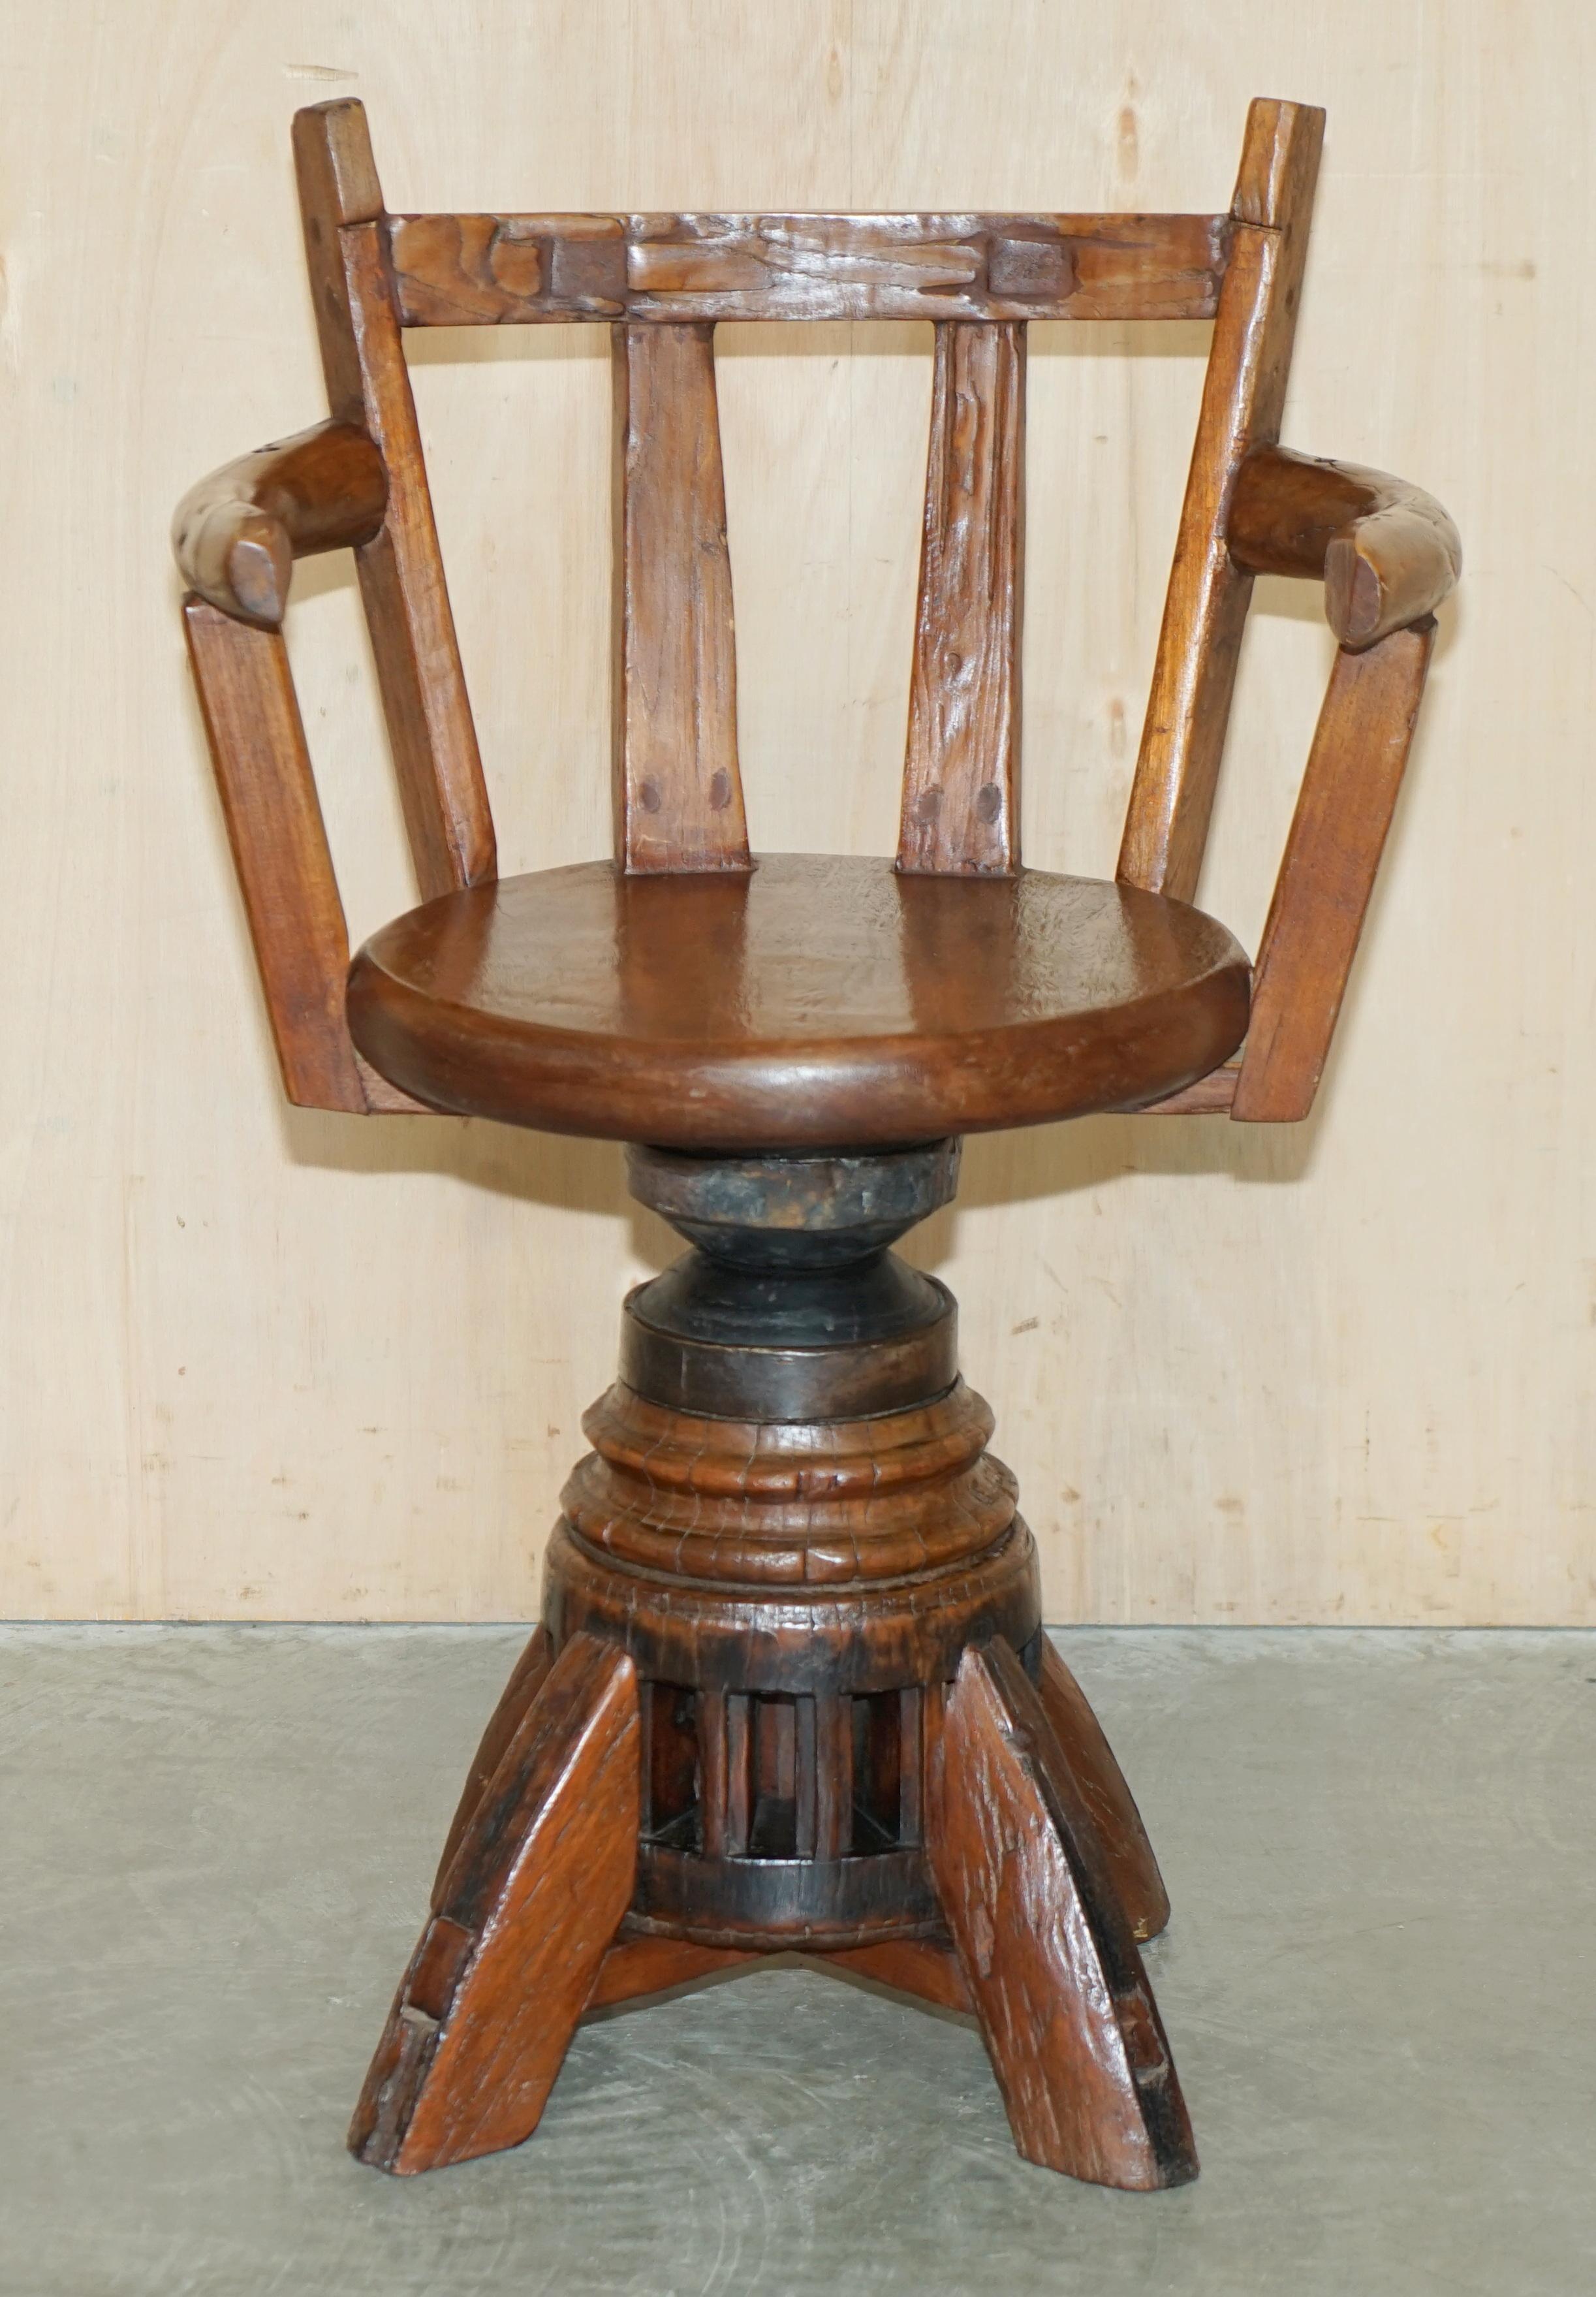 We are delighted to offer for sale this very rare and highly collectable circa 1760 Carthorse wheel which has been rebuilt into a captains swivel armchair in solid Elm.

A very good looking and decorative chair, I have ever never seen another like